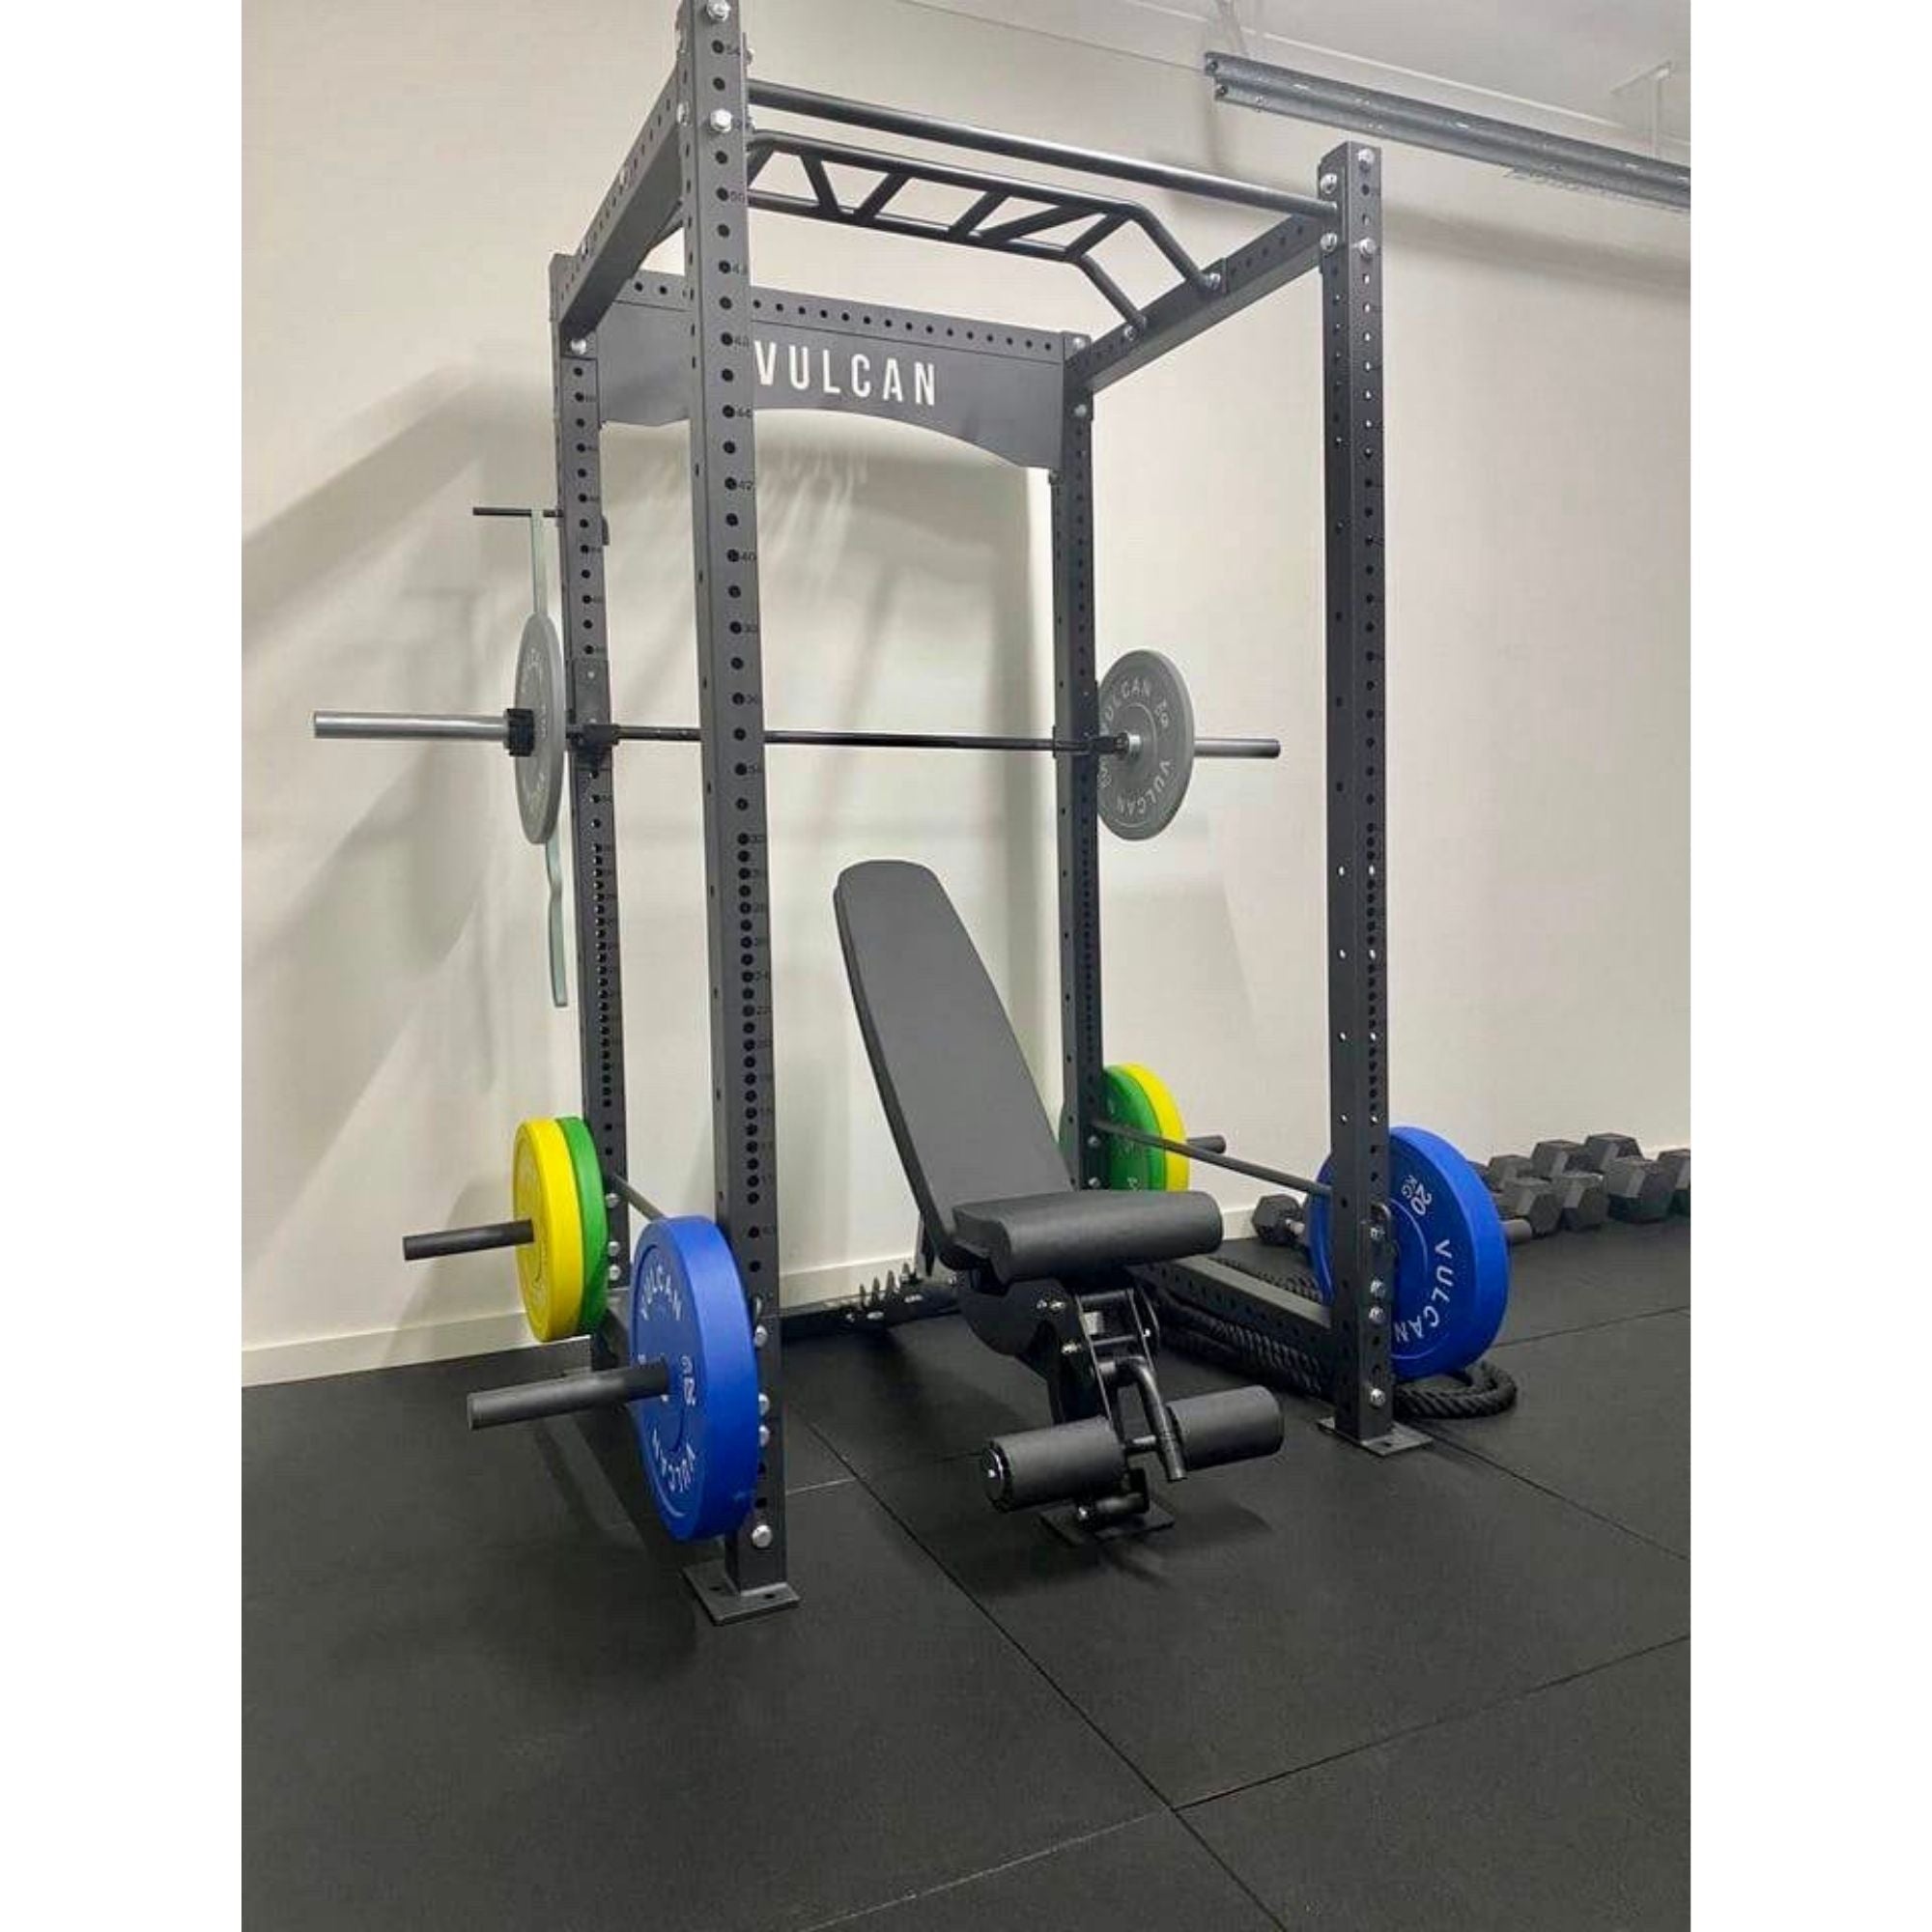 VULCAN Commercial Power Cage, Olympic Barbell, 150kg Black Bumper Weight Plates & Commercial FID Bench | IN STOCK